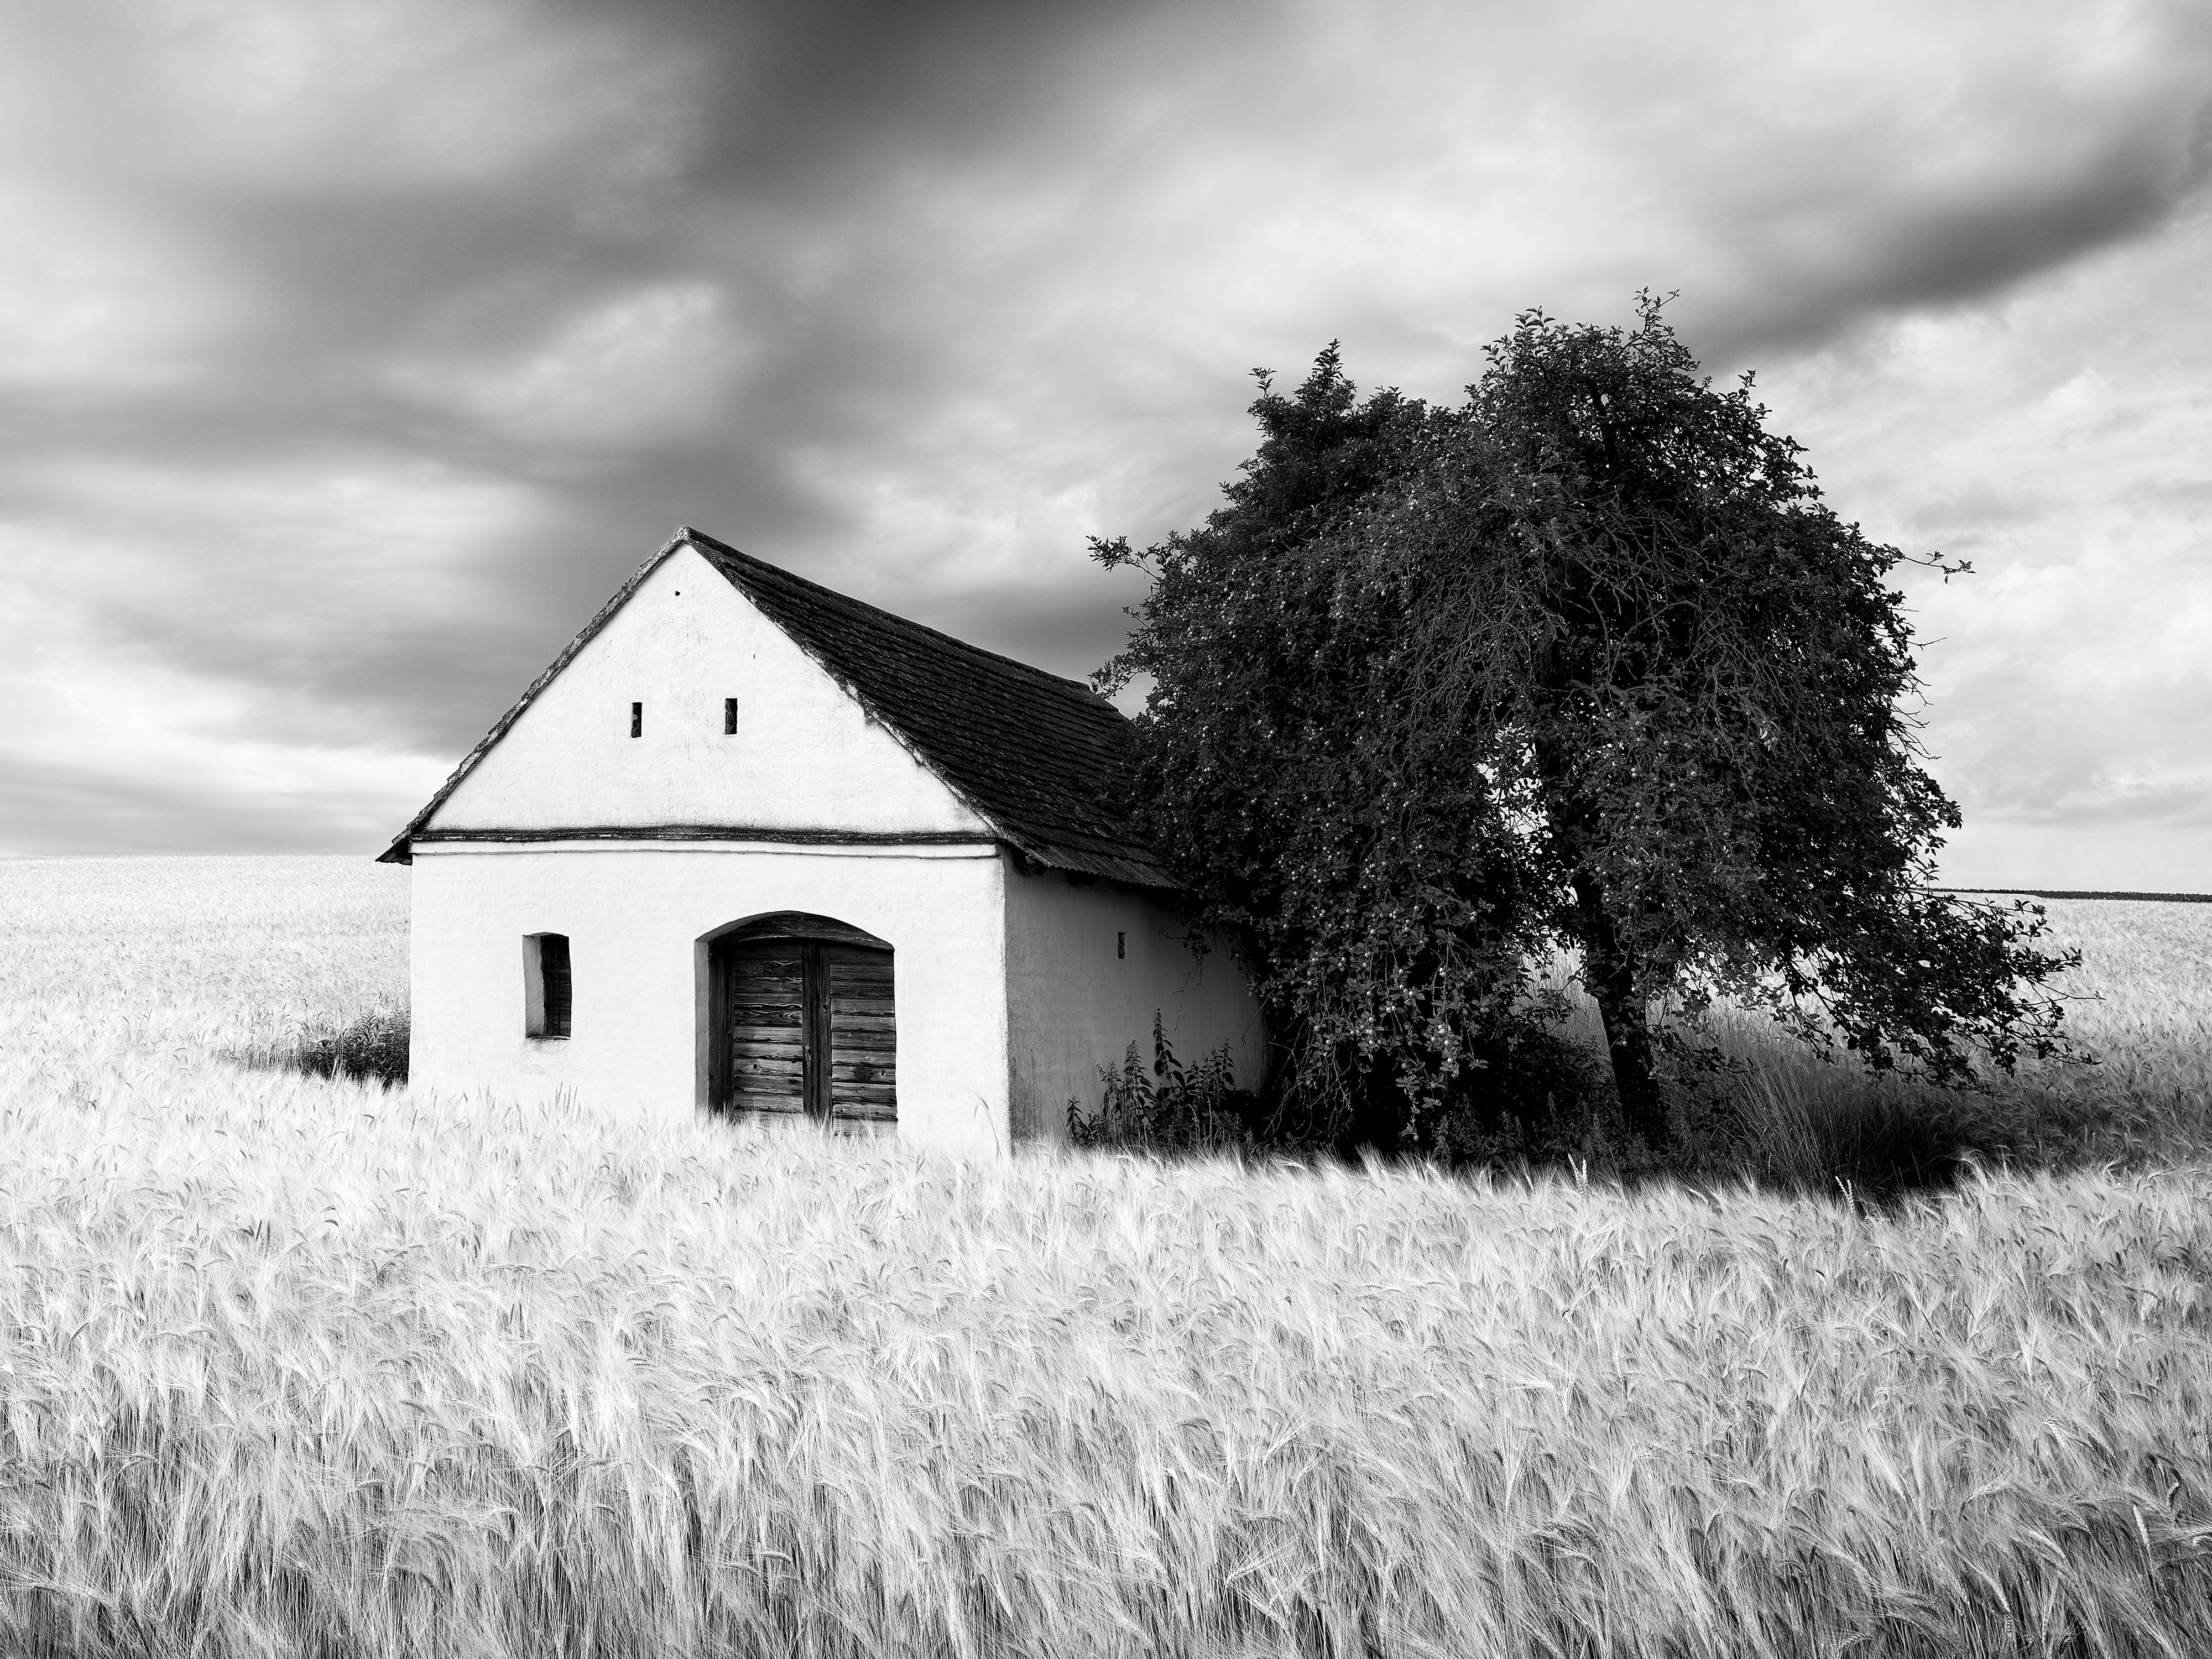 Wine Press House, wheat field, heavy clouds, black & white landscape photography For Sale 3